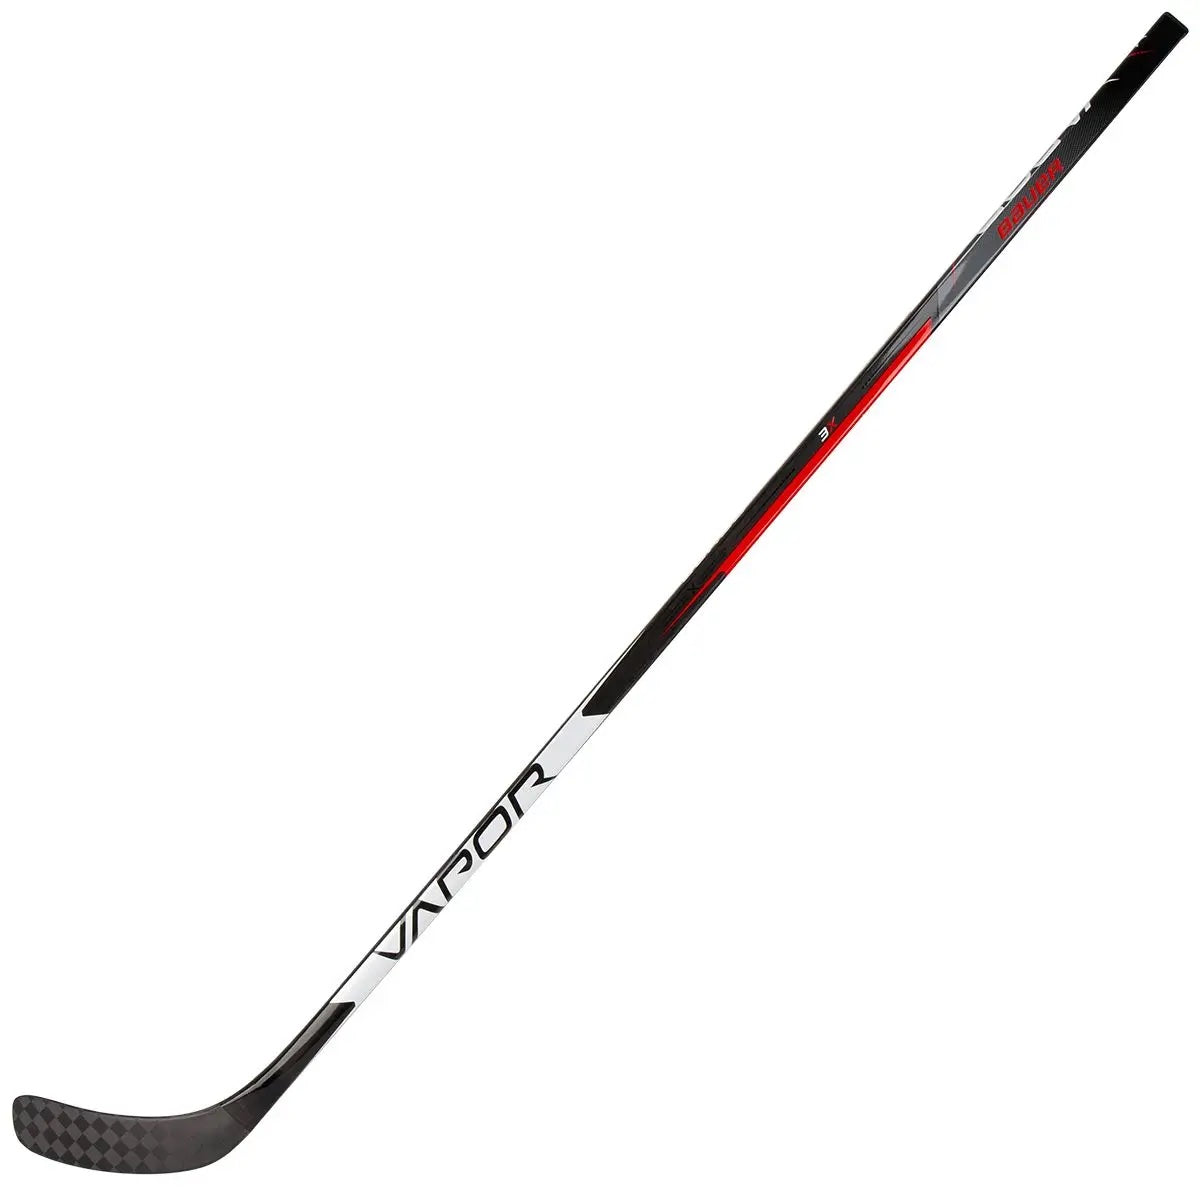 Backhand view picture of Bauer S21 Vapor 3X Grip Ice Hockey Stick (Intermediate)